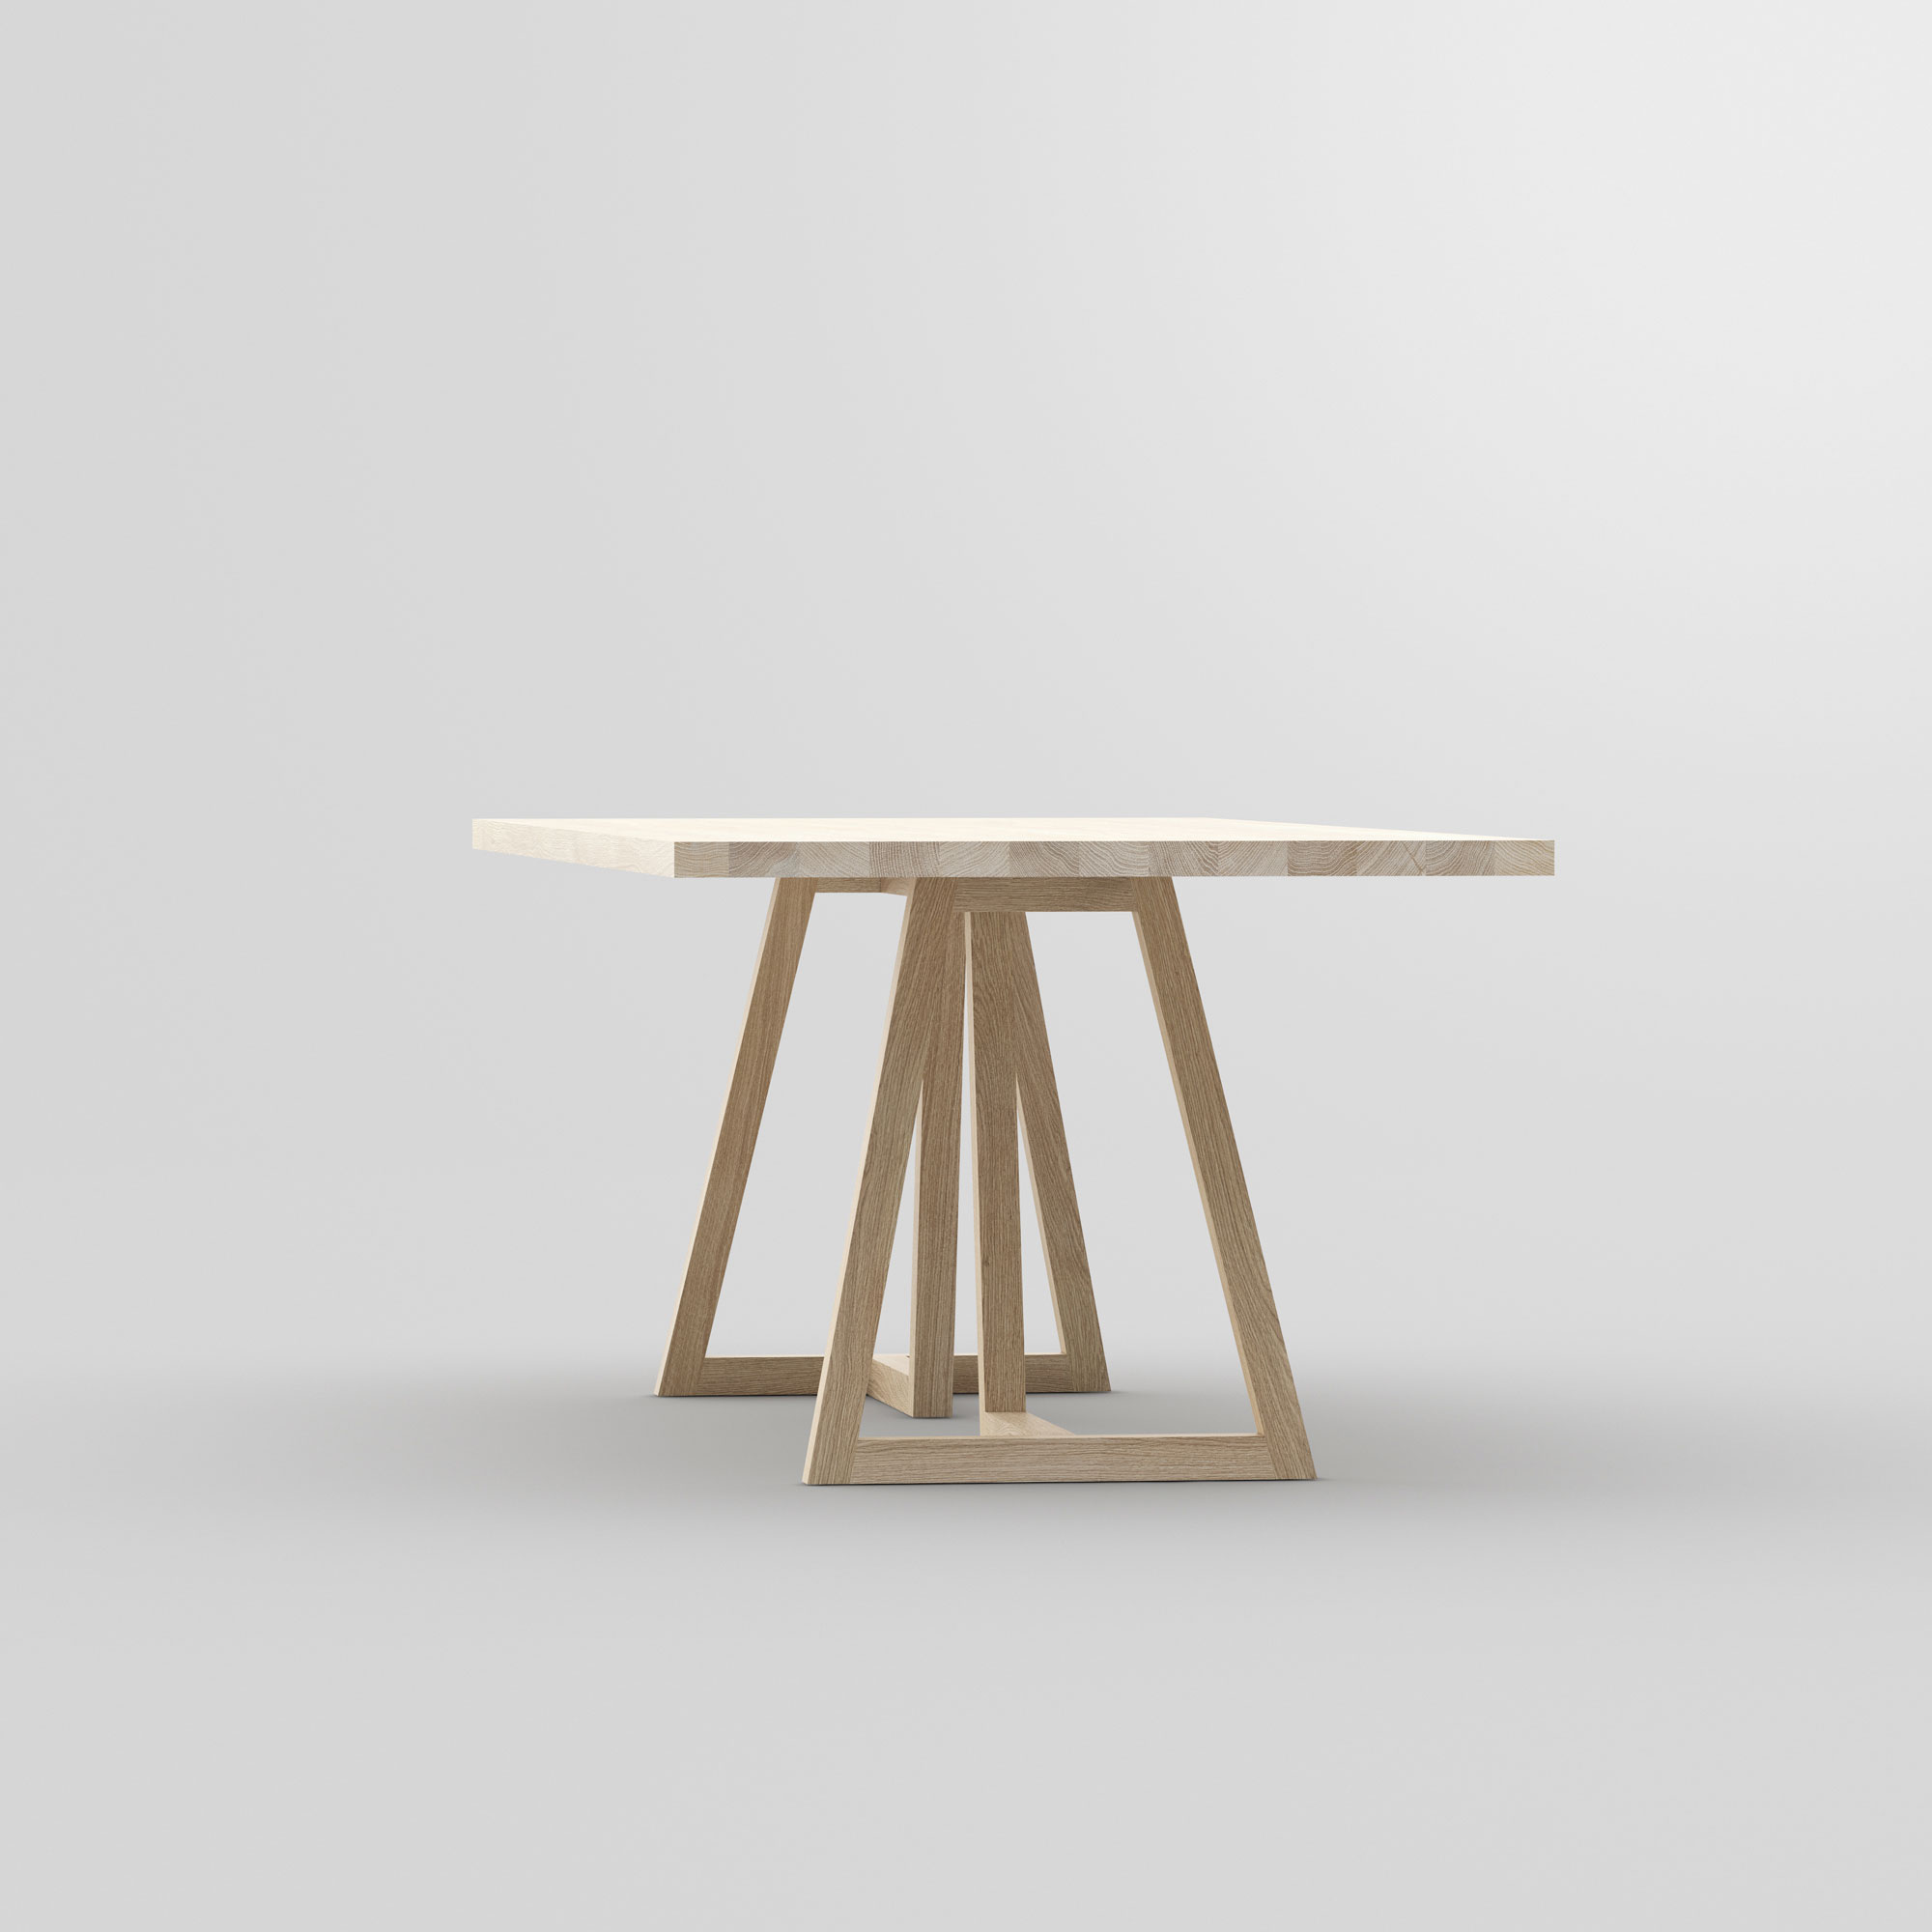 Designer Solid Wood Table MARGO cam4 custom made in solid wood by vitamin design